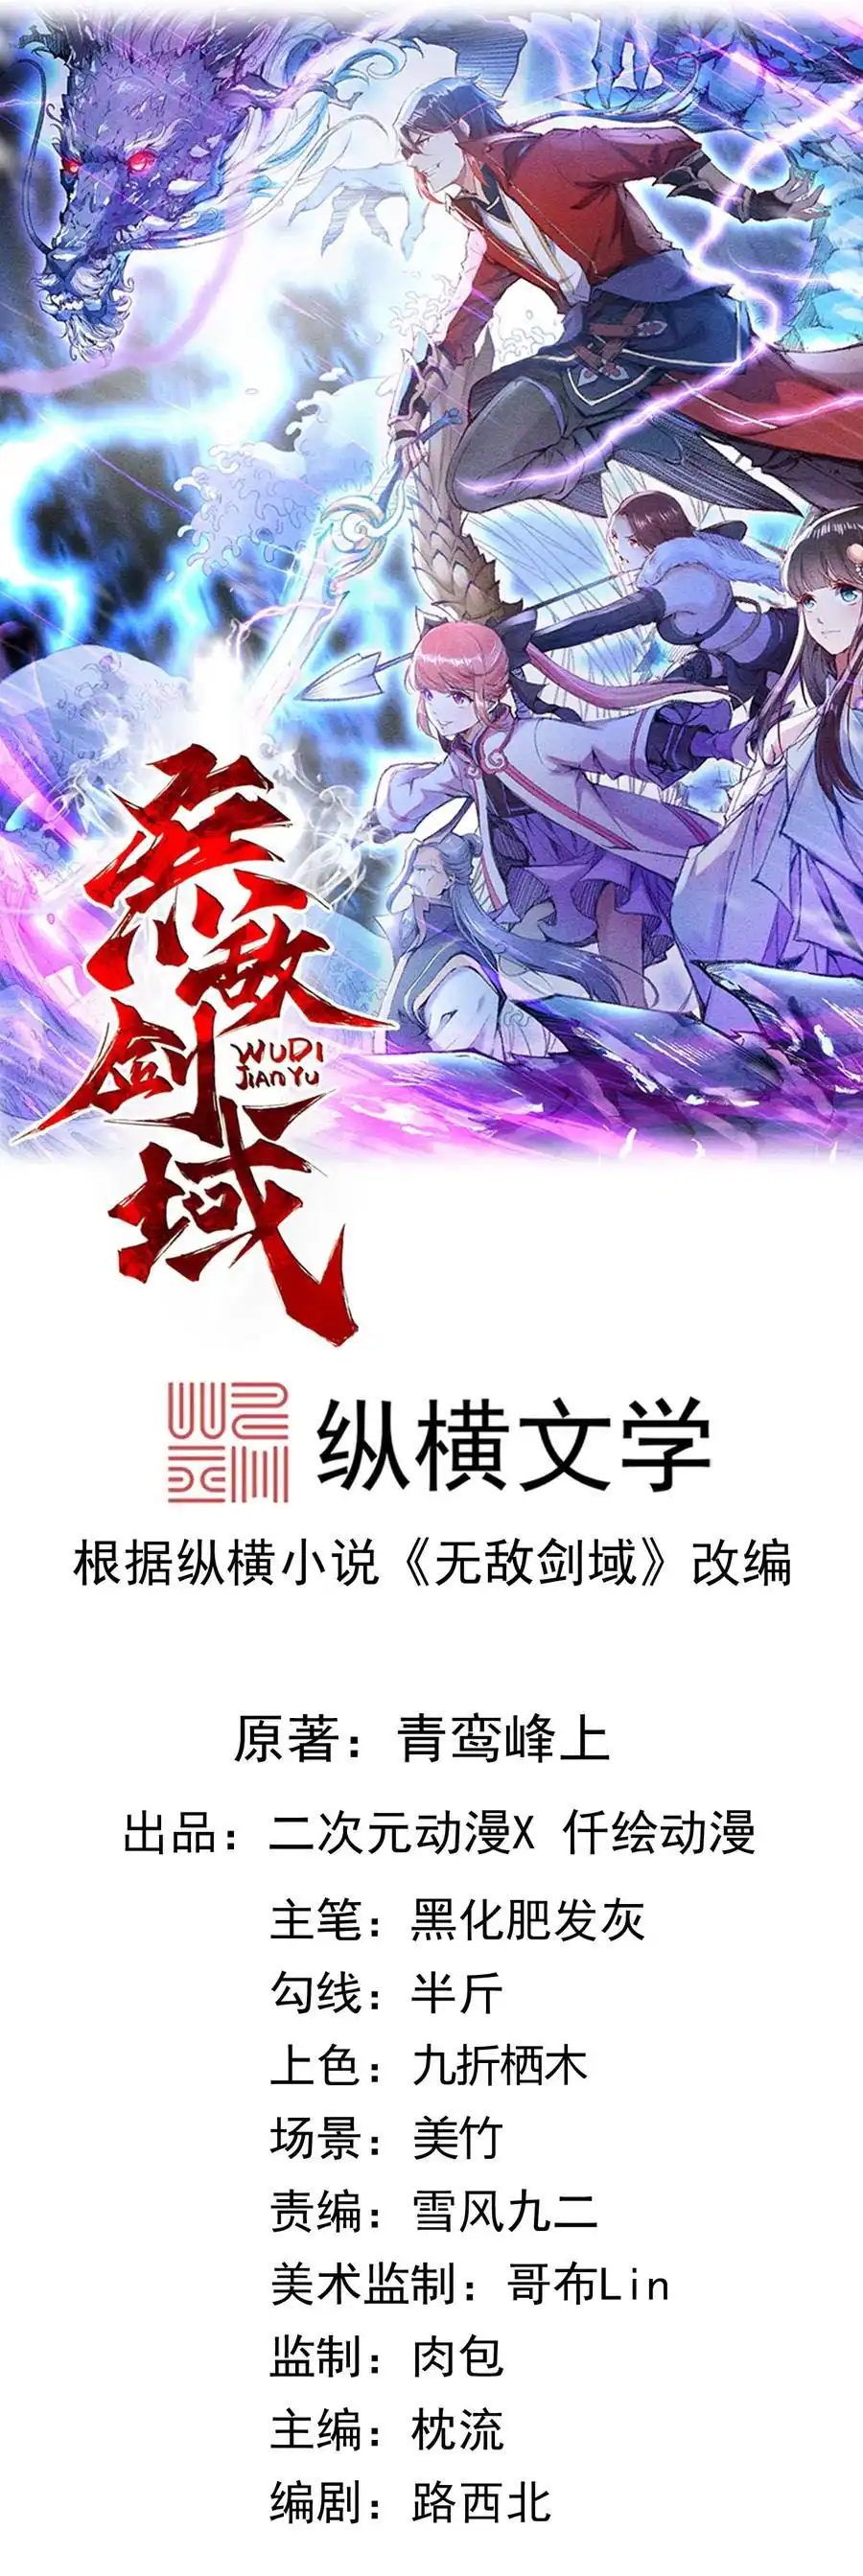 Invincible Sword Domain Chapter 43